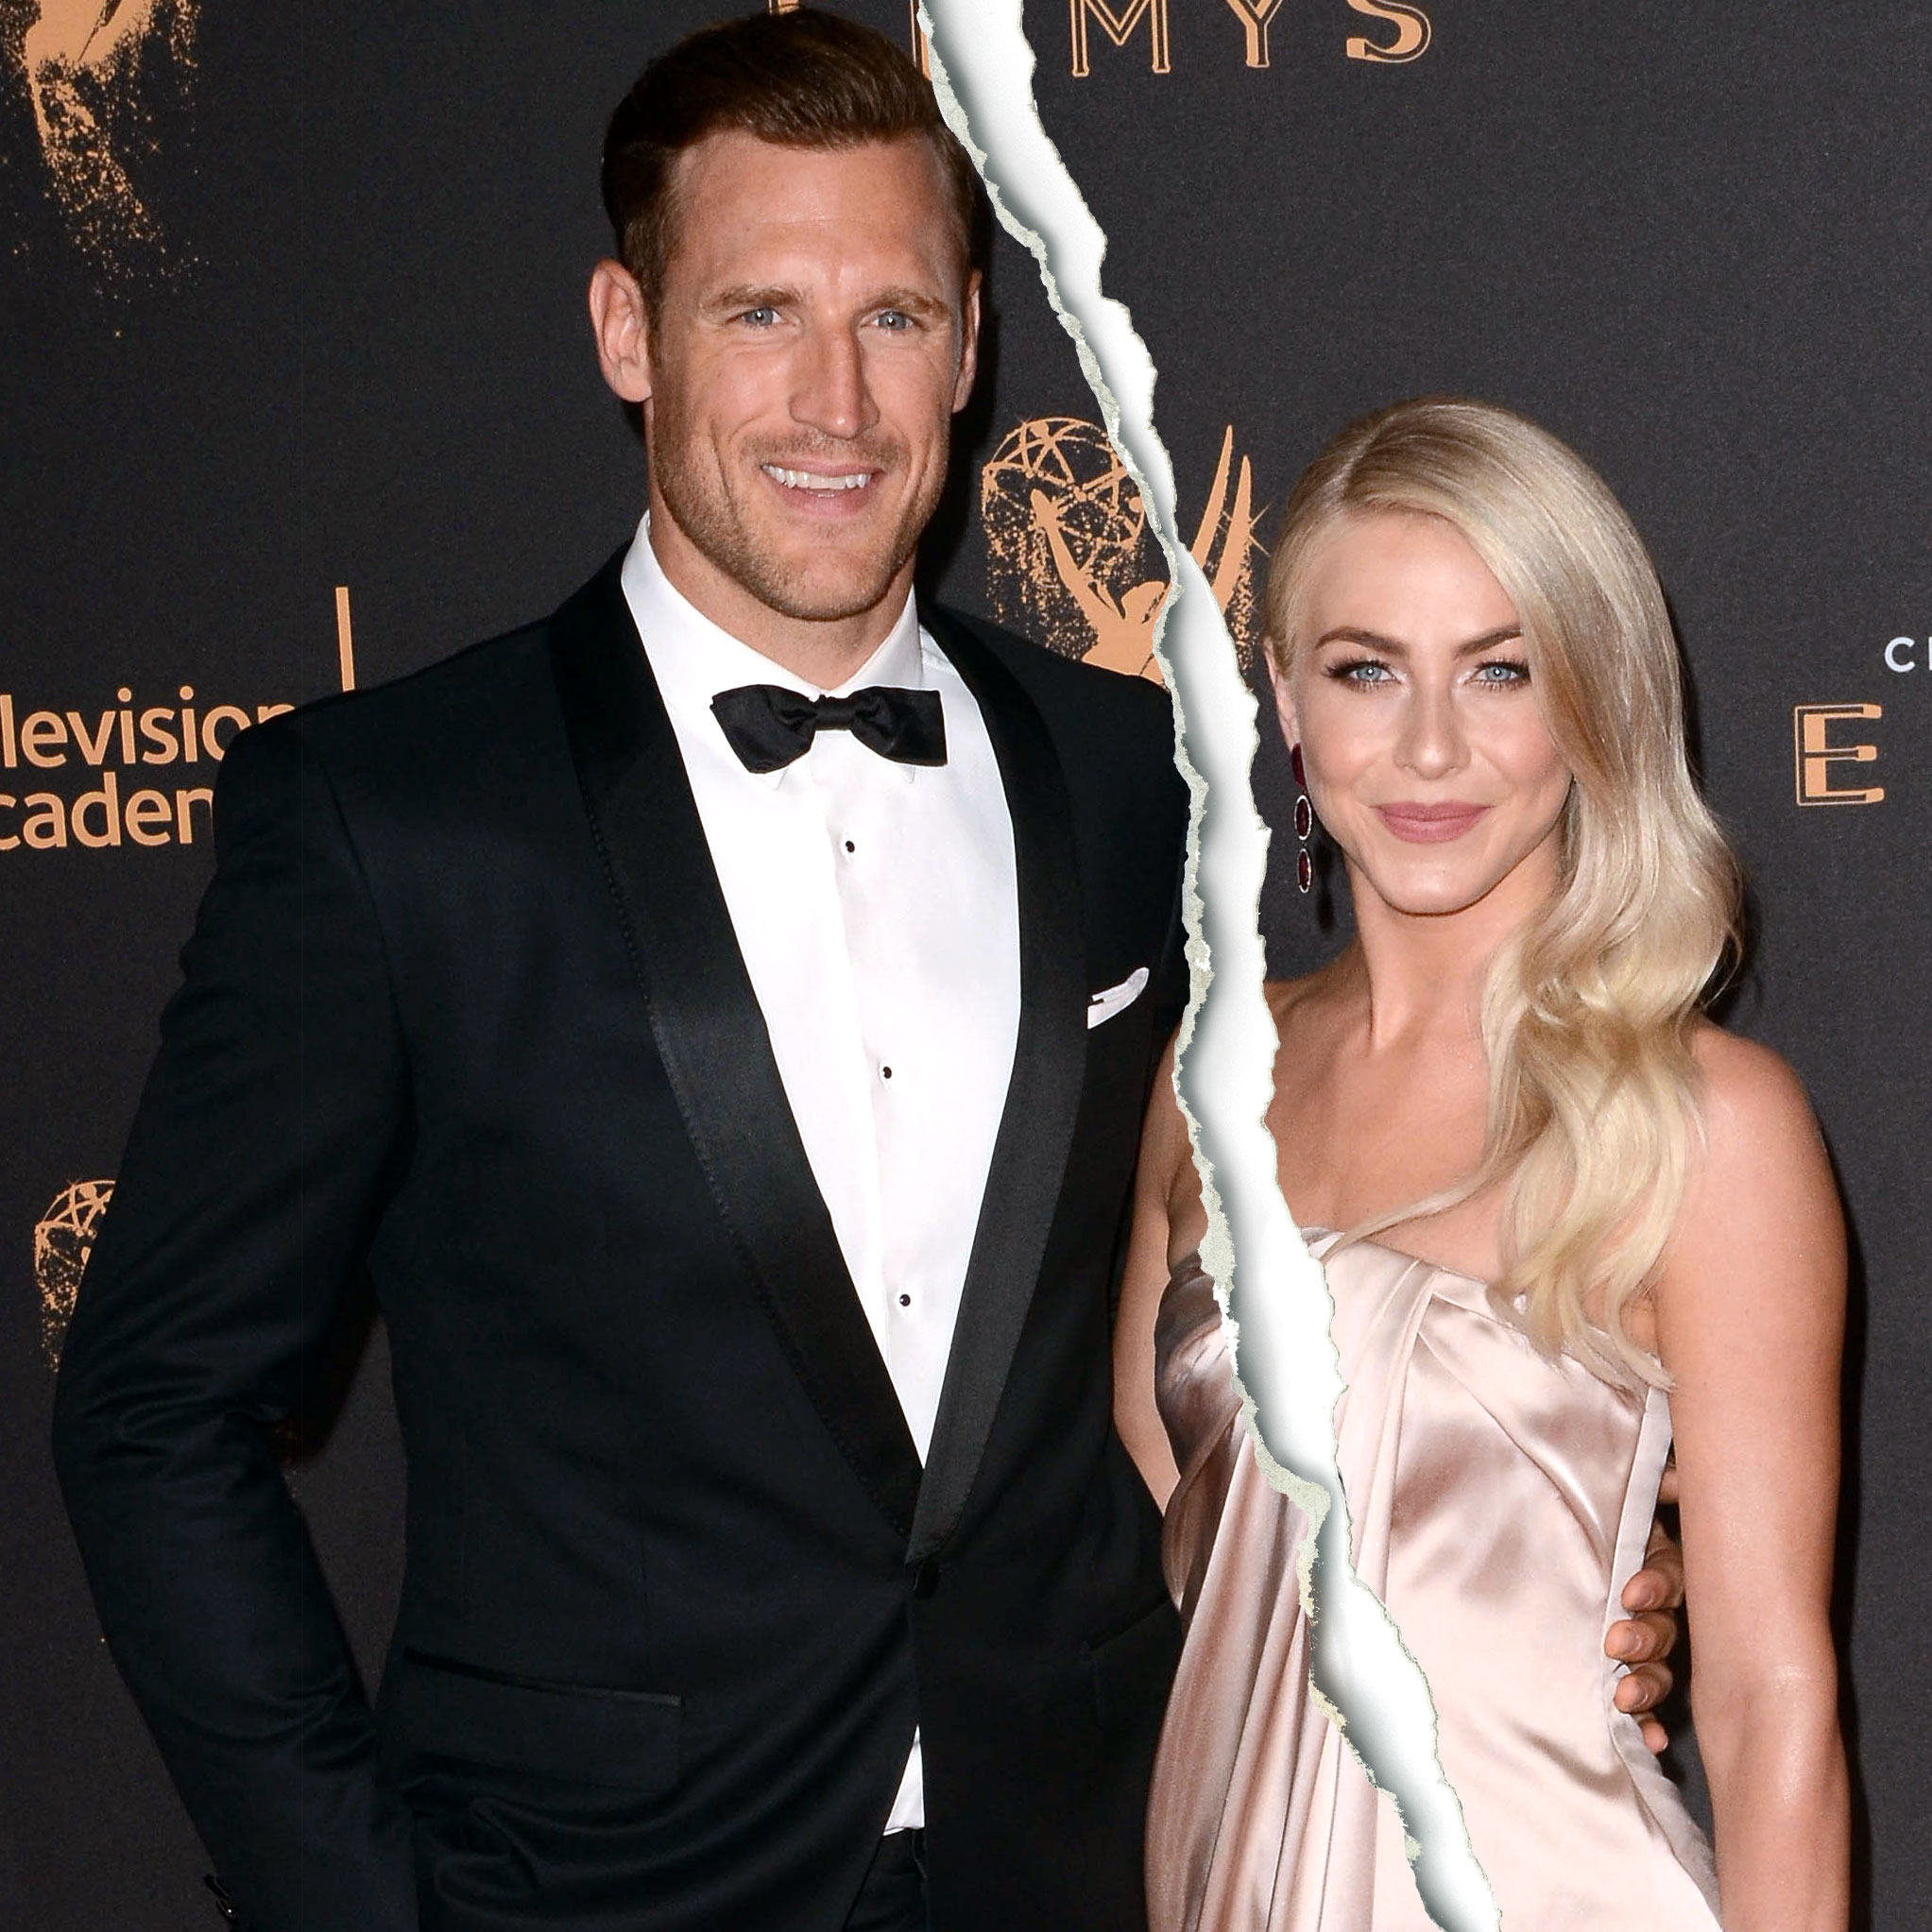 Julianne Hough Brooks Laich Split After Nearly 3 Years of